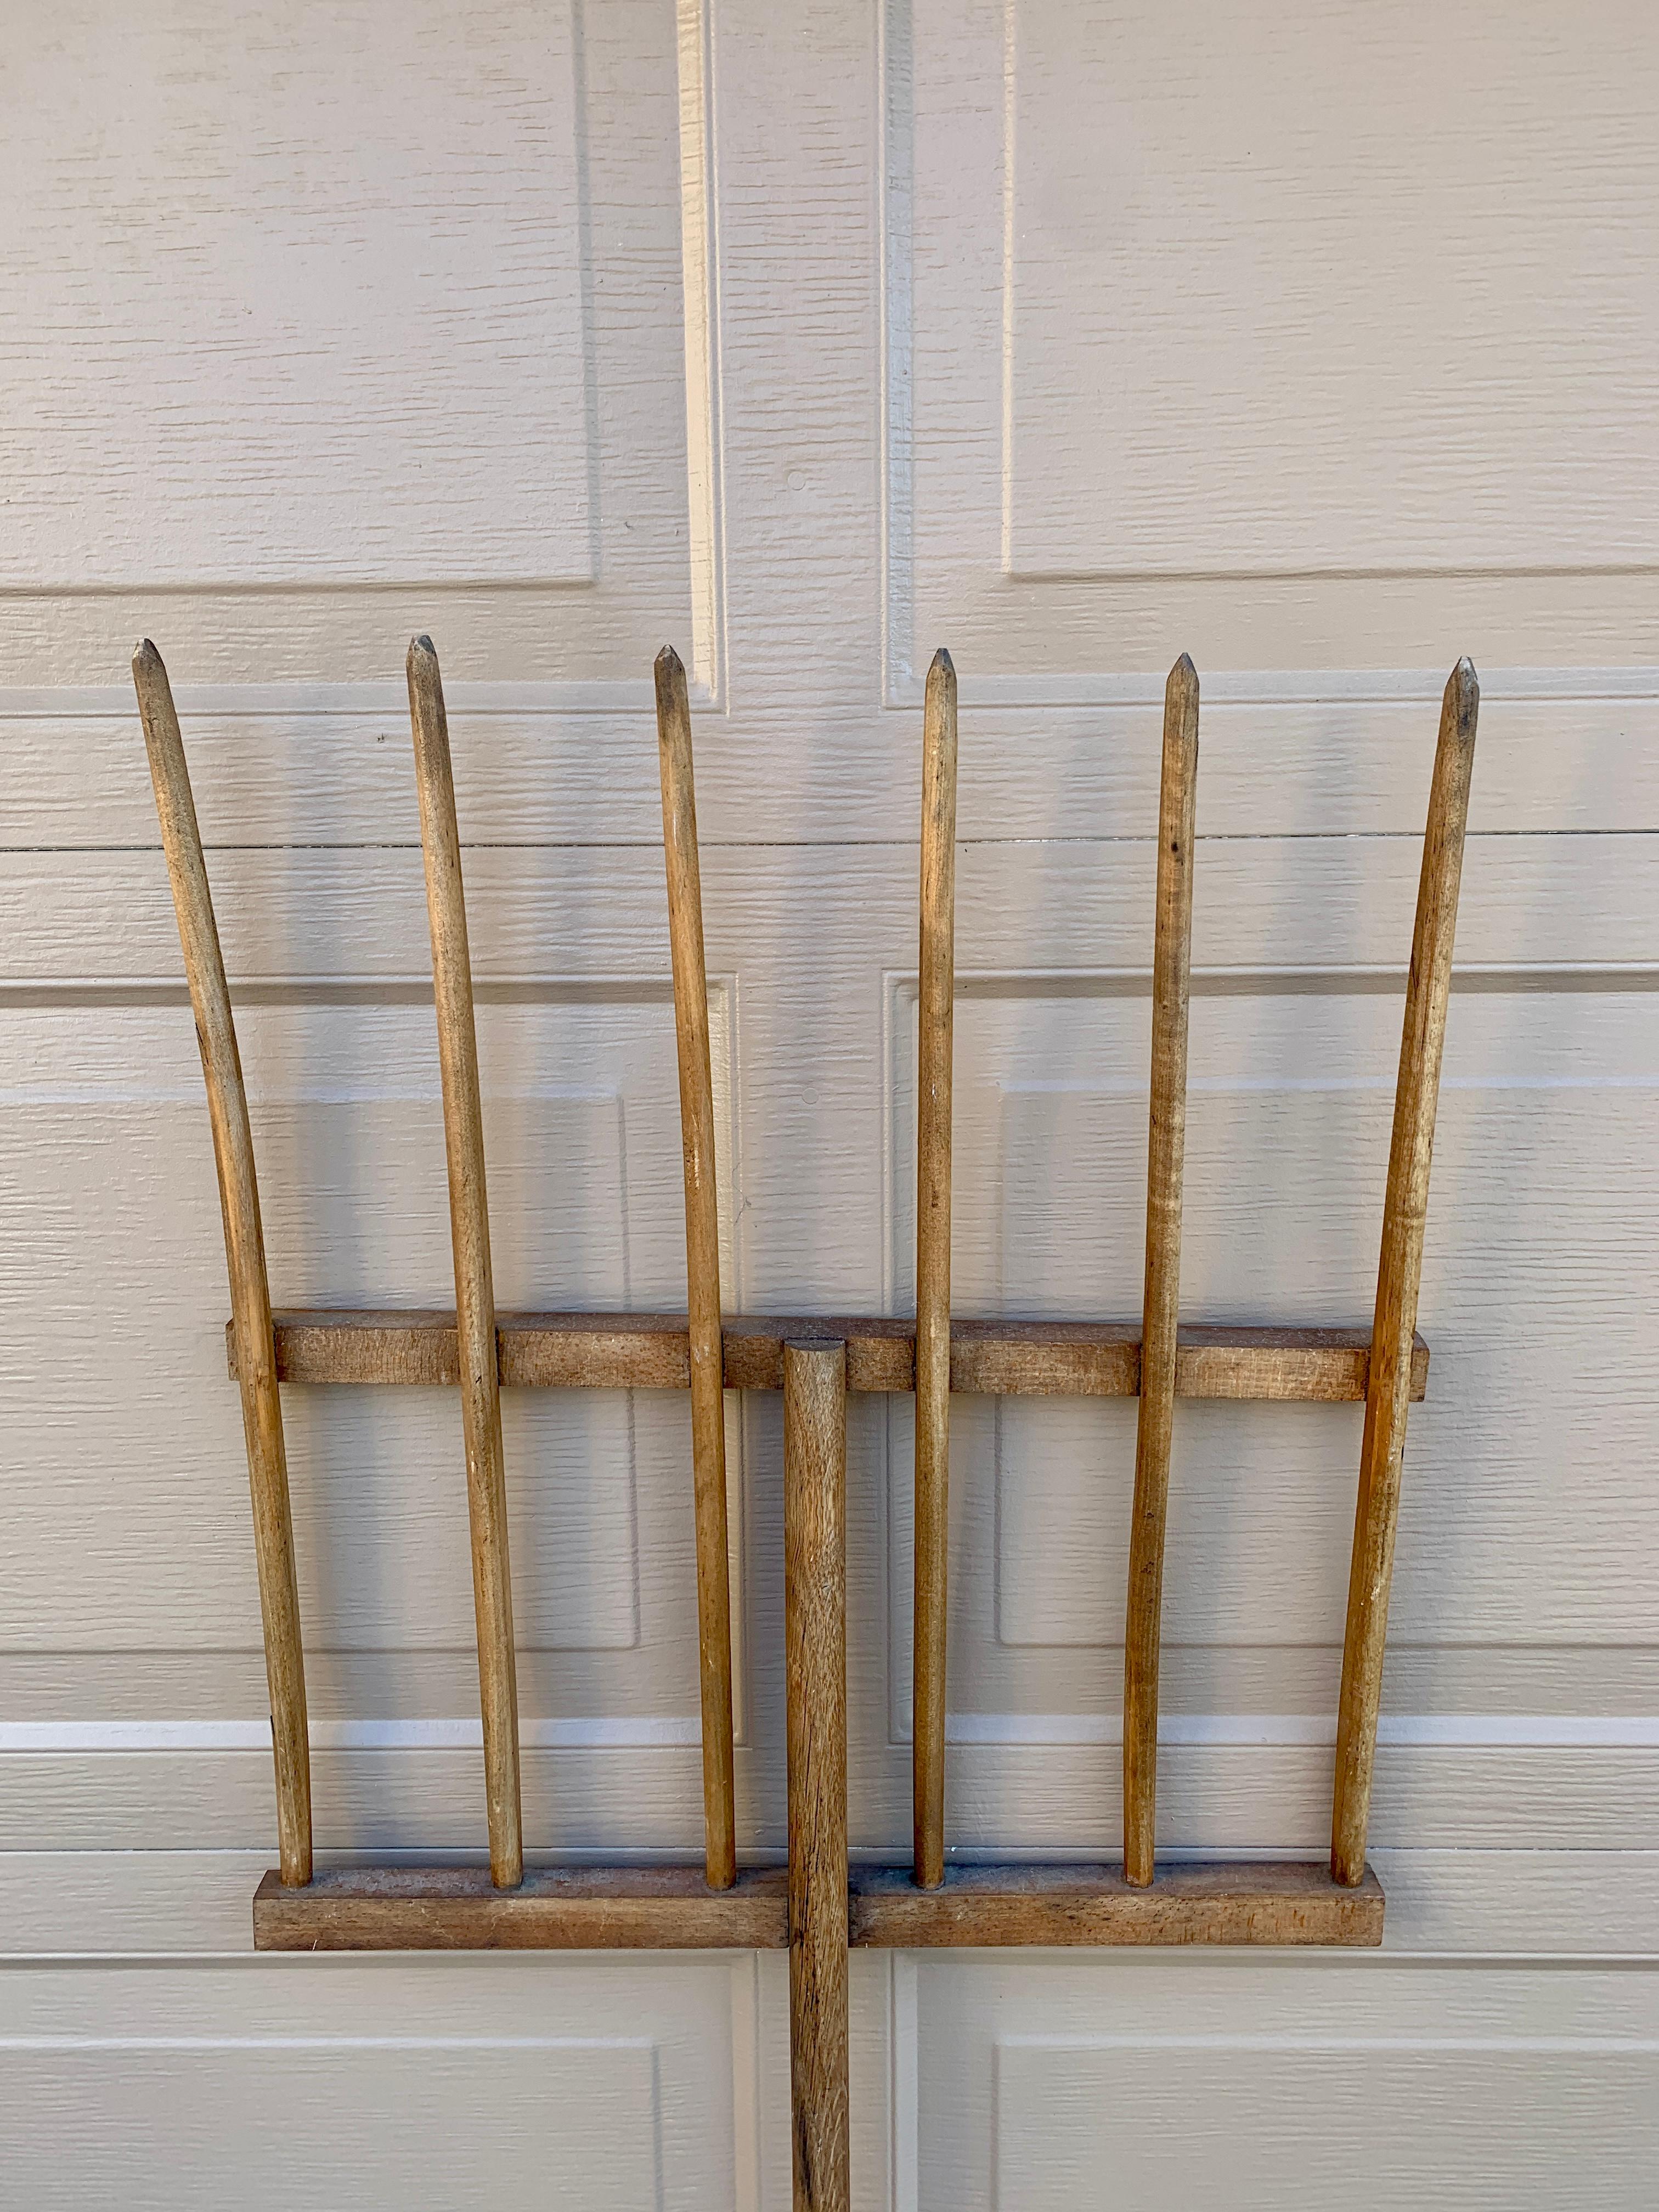 Antique 19th Century Monumental Hand Made Wooden Pitchfork In Good Condition For Sale In Elkhart, IN